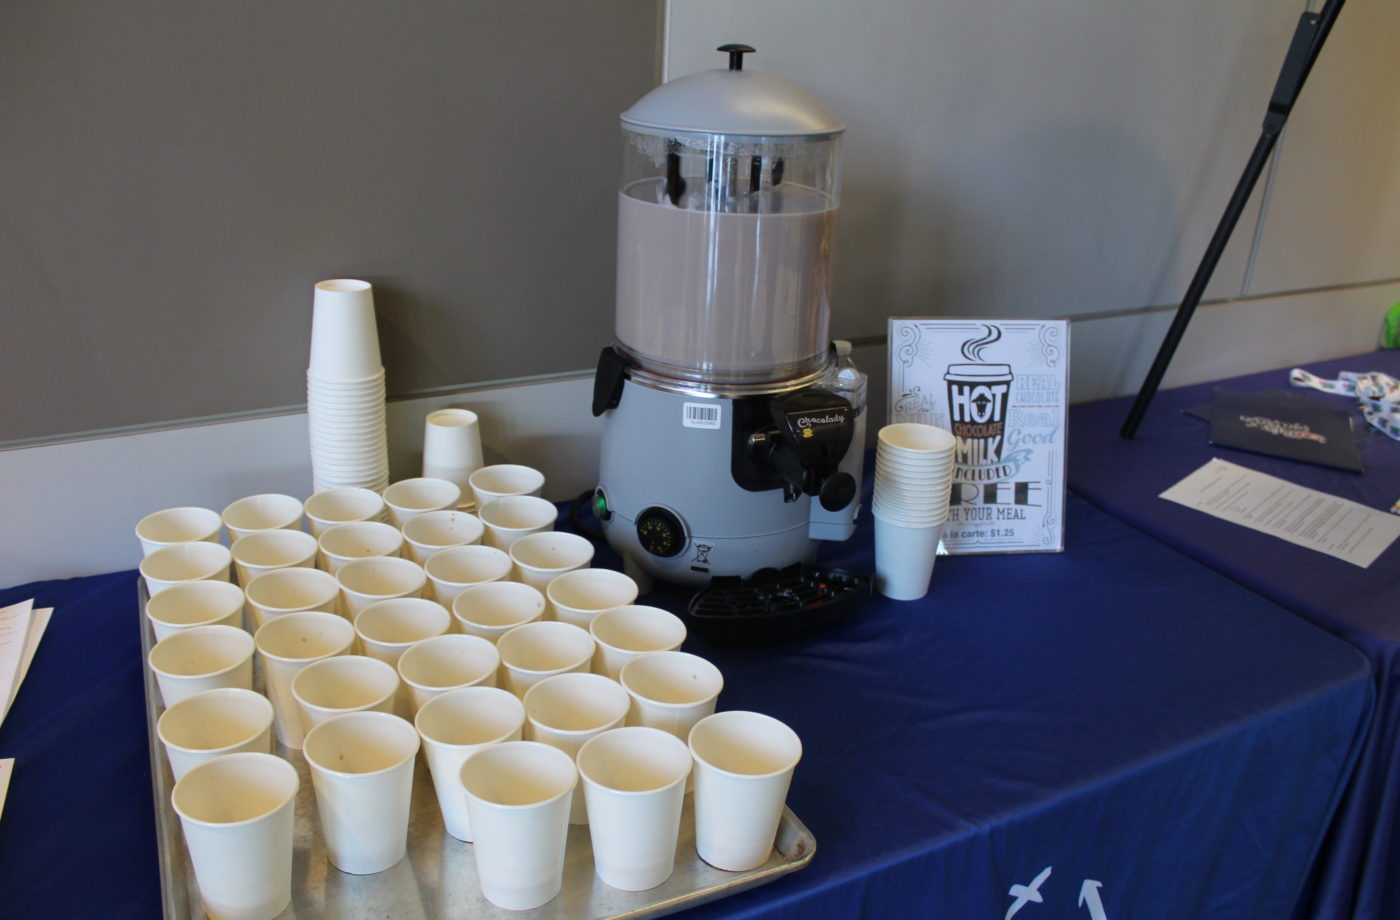 How a hot chocolate dispenser can boost revenue year-round